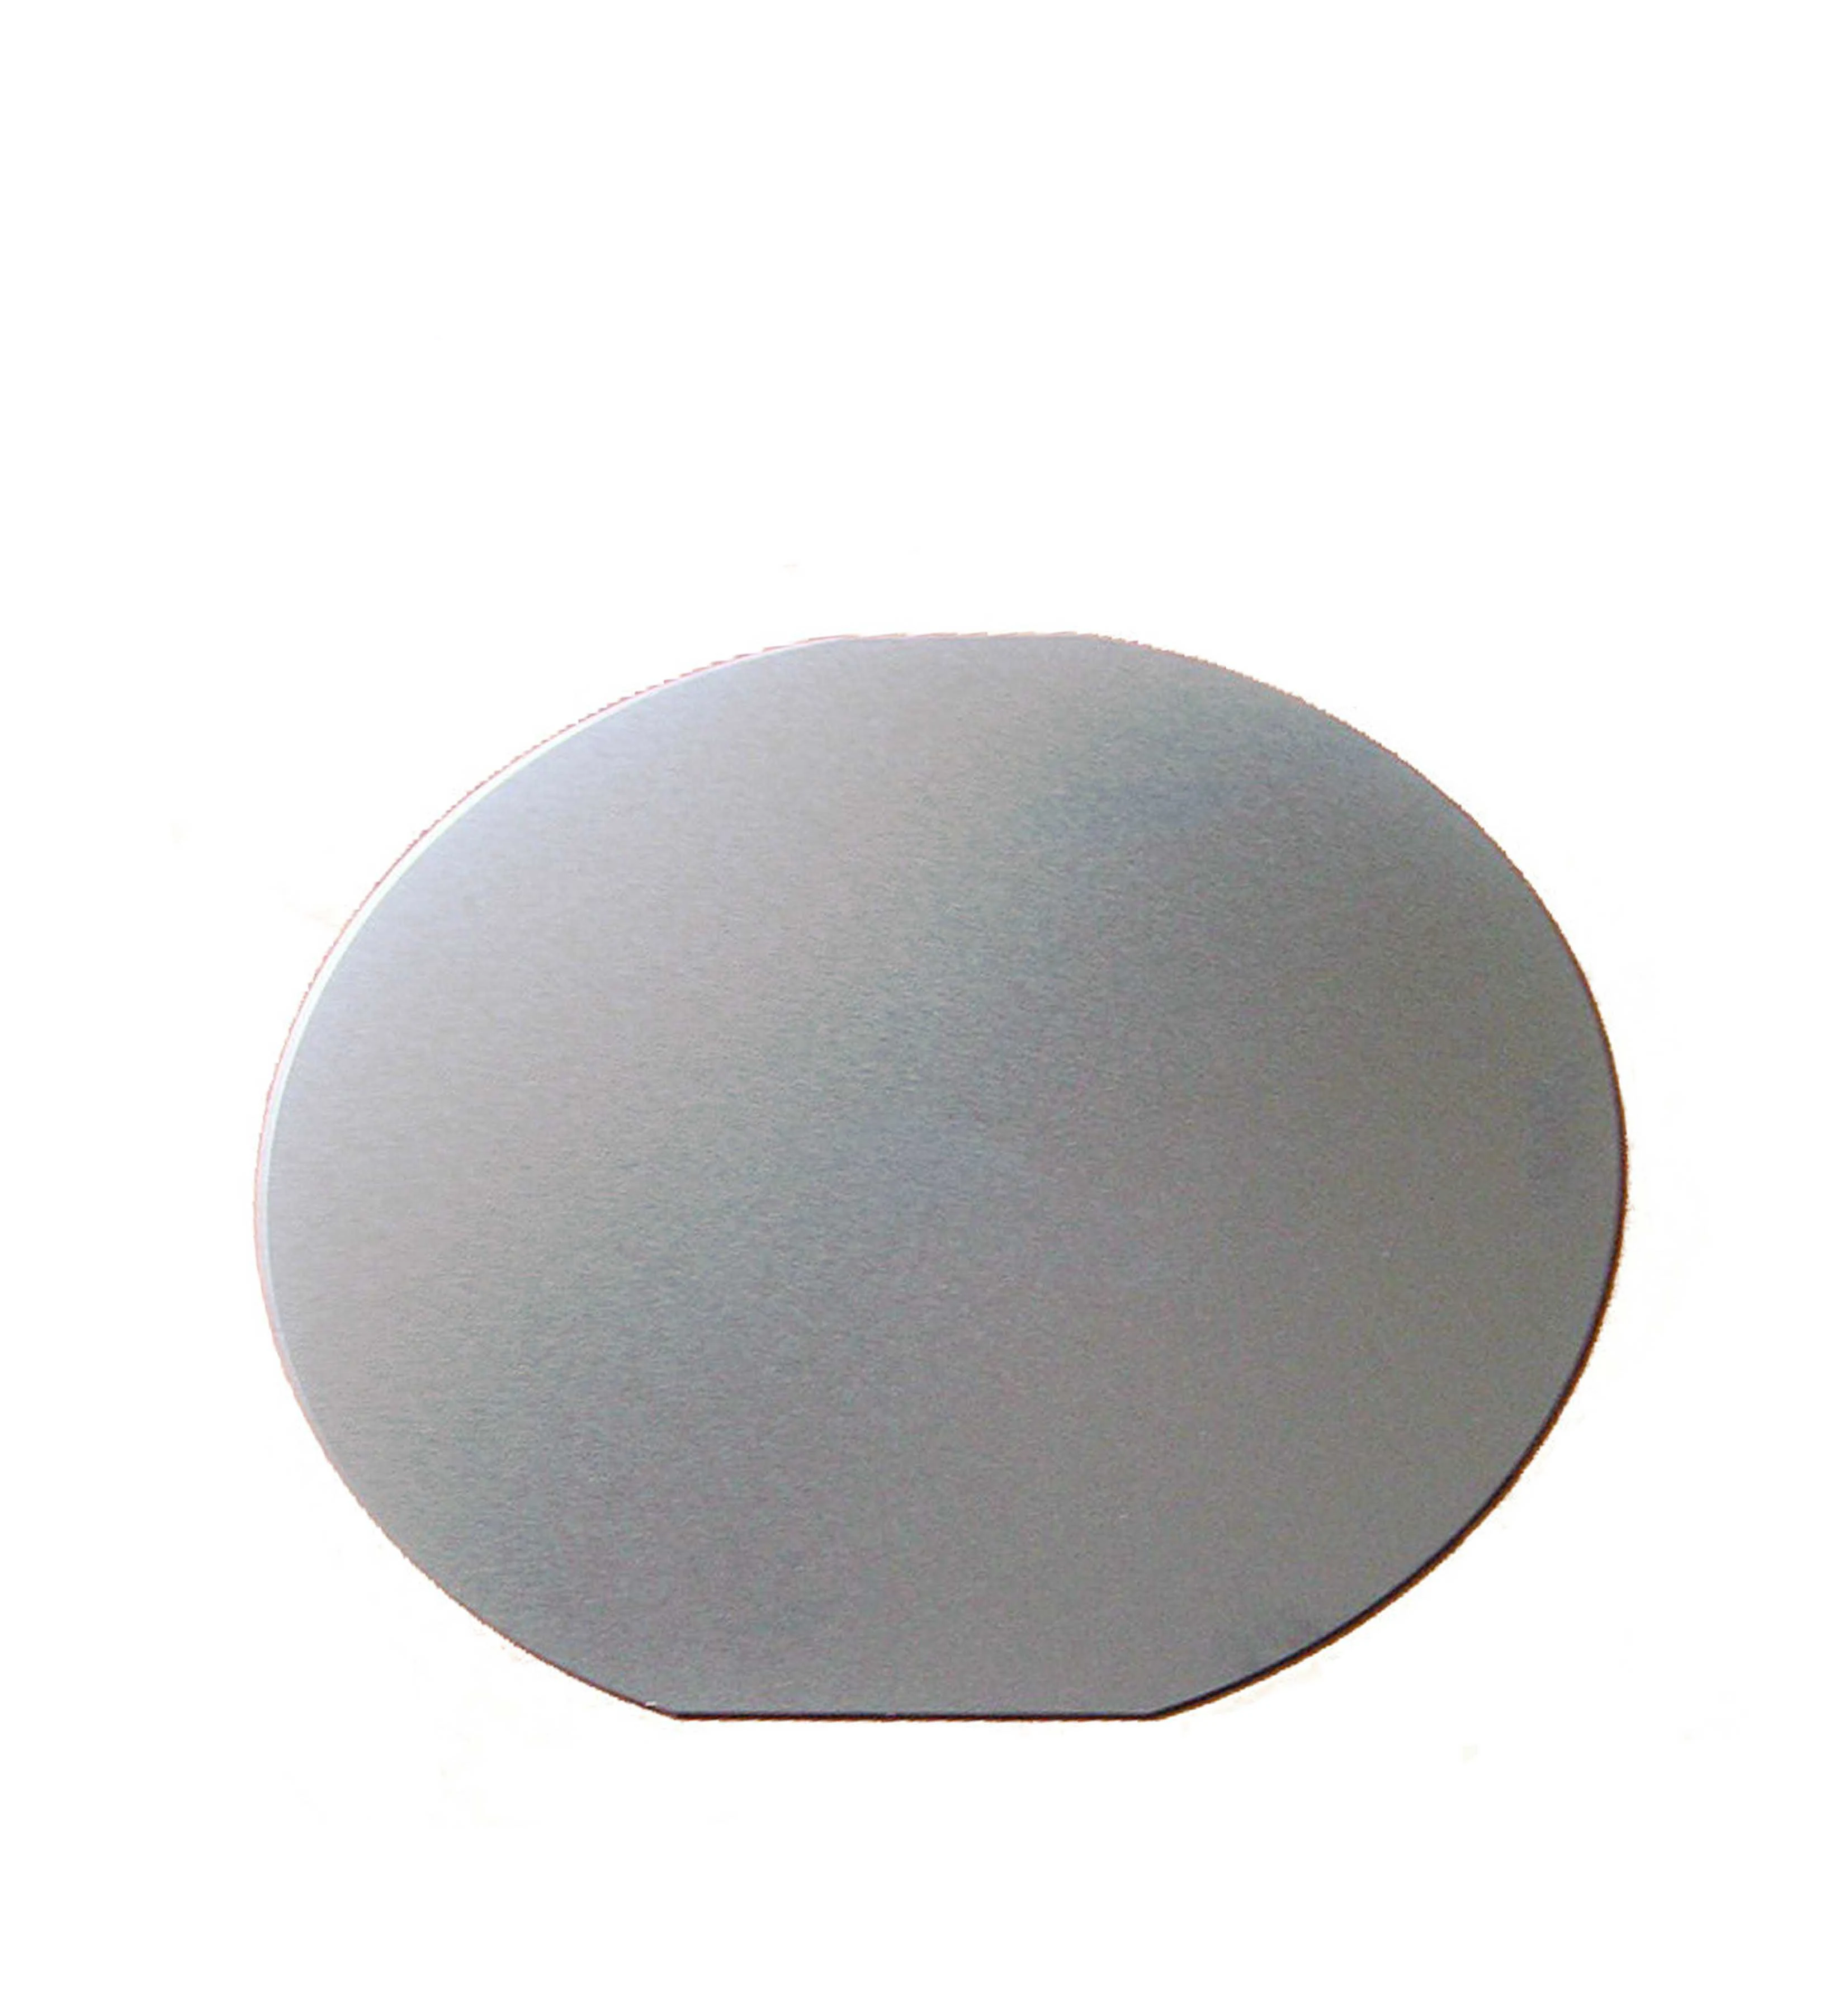 8 Inch Monocrystalline Silicon Wafer  Best Price for Semiconductor